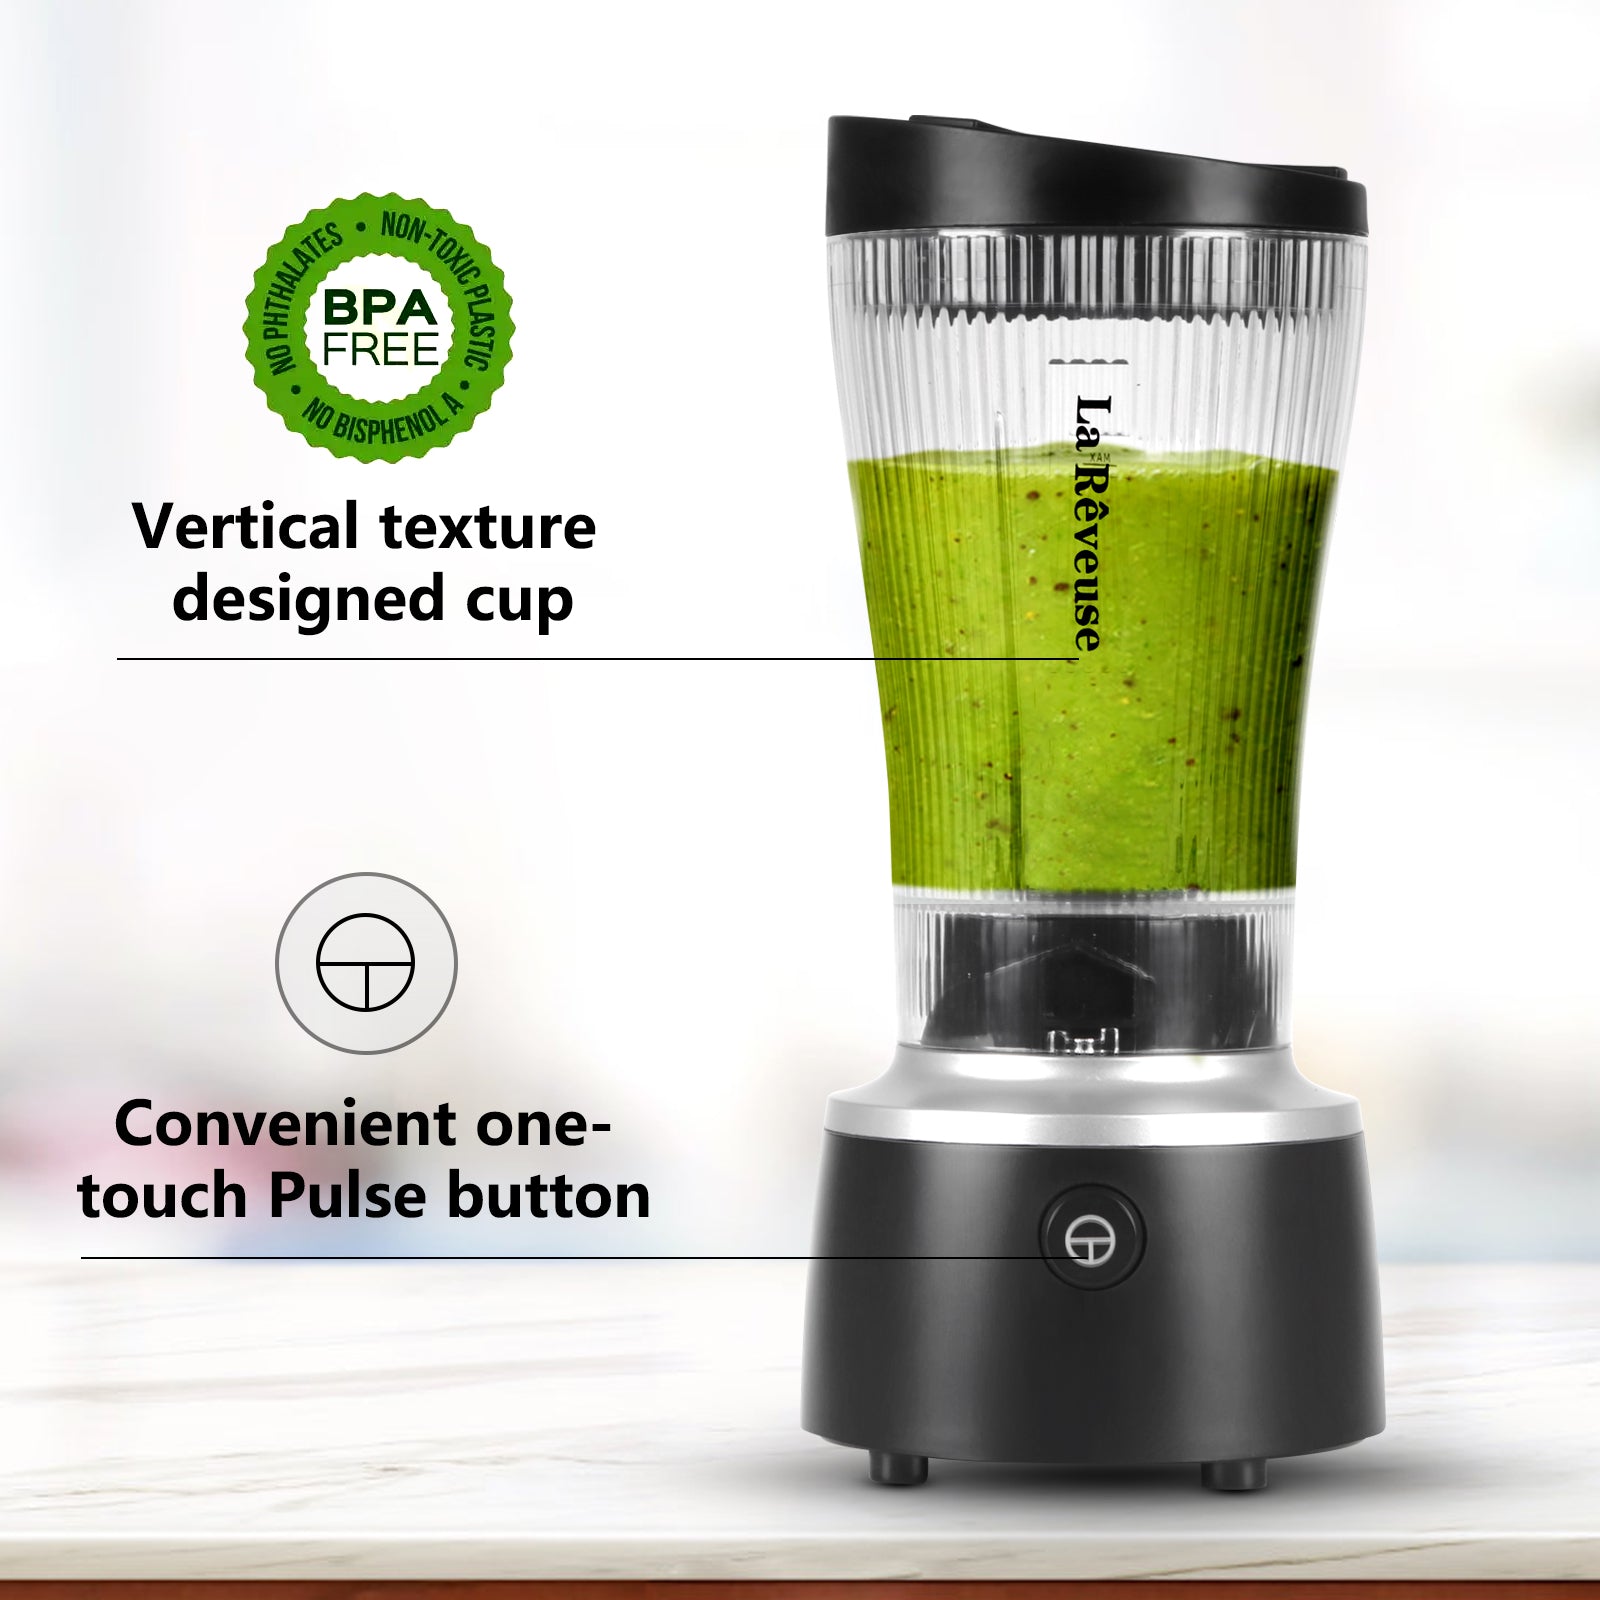 Personal Blender for Shakes and Smoothies,250W blender for